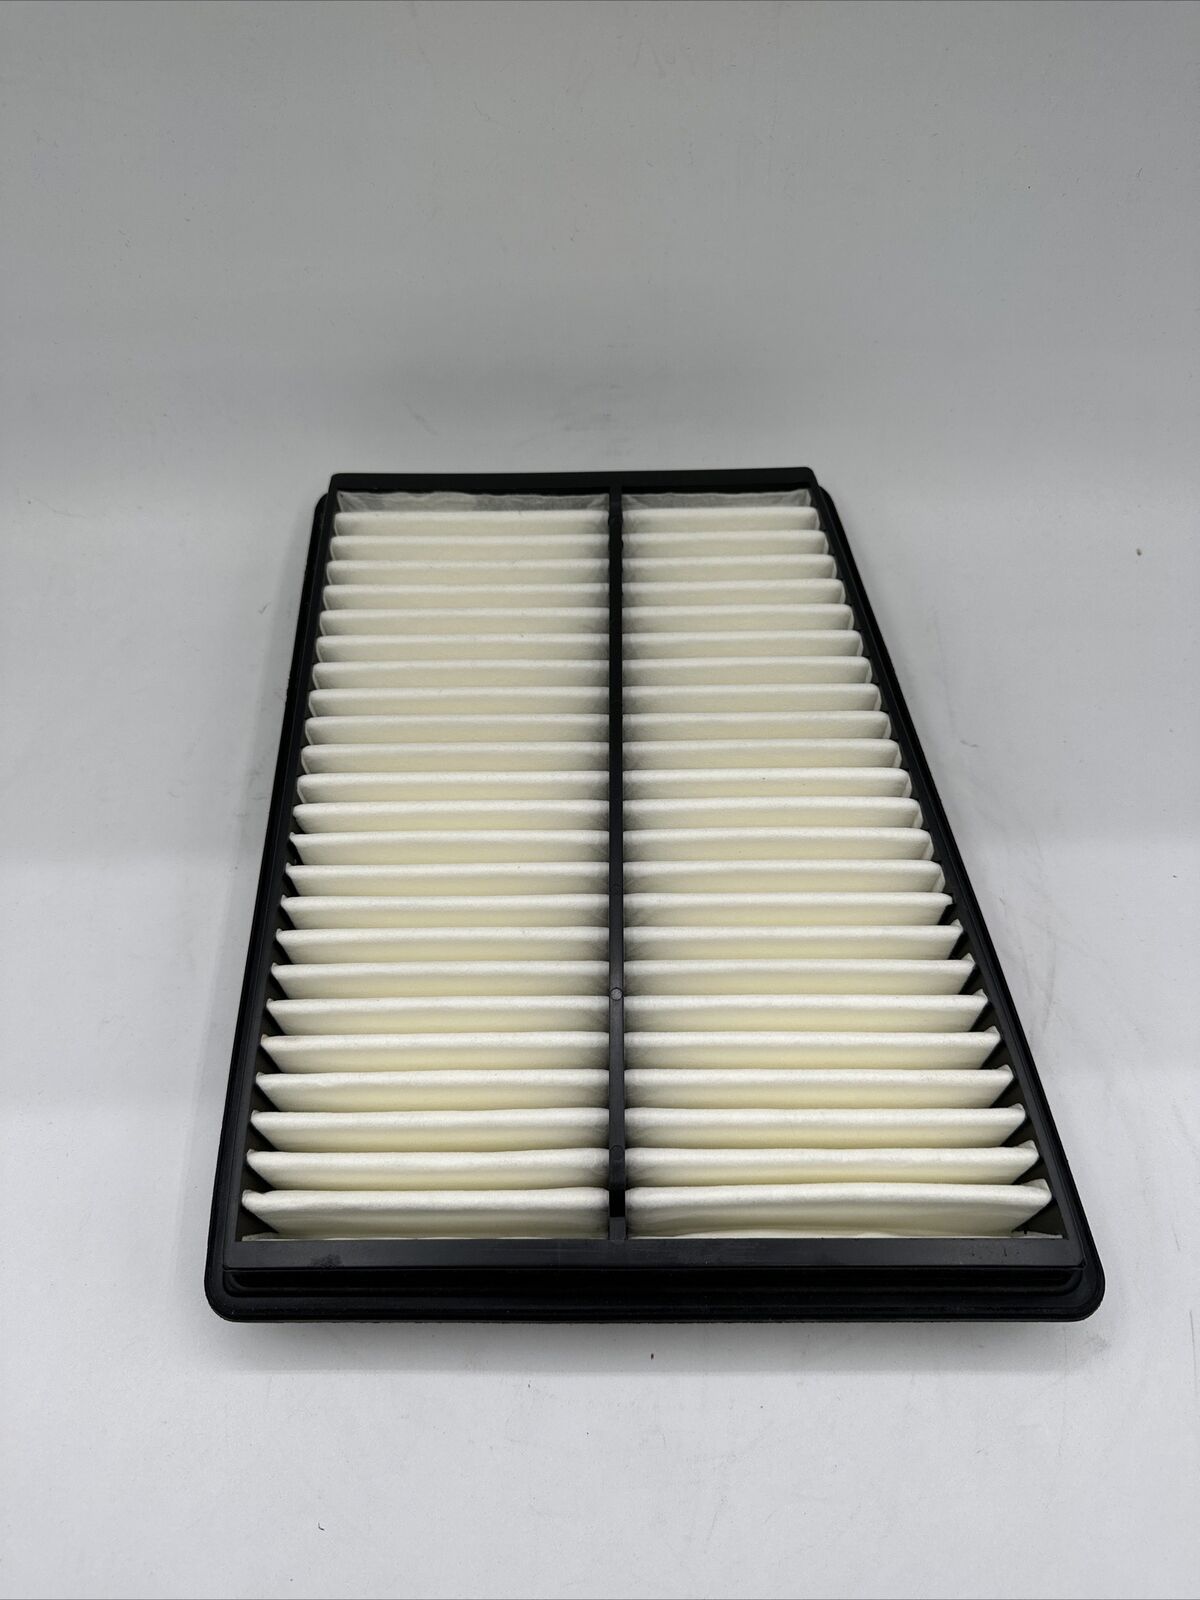 NOS Wix 46092 Air Filter Fits ACURA LEGEND 1991-1995, ACURA TL 1996-1998, F+S